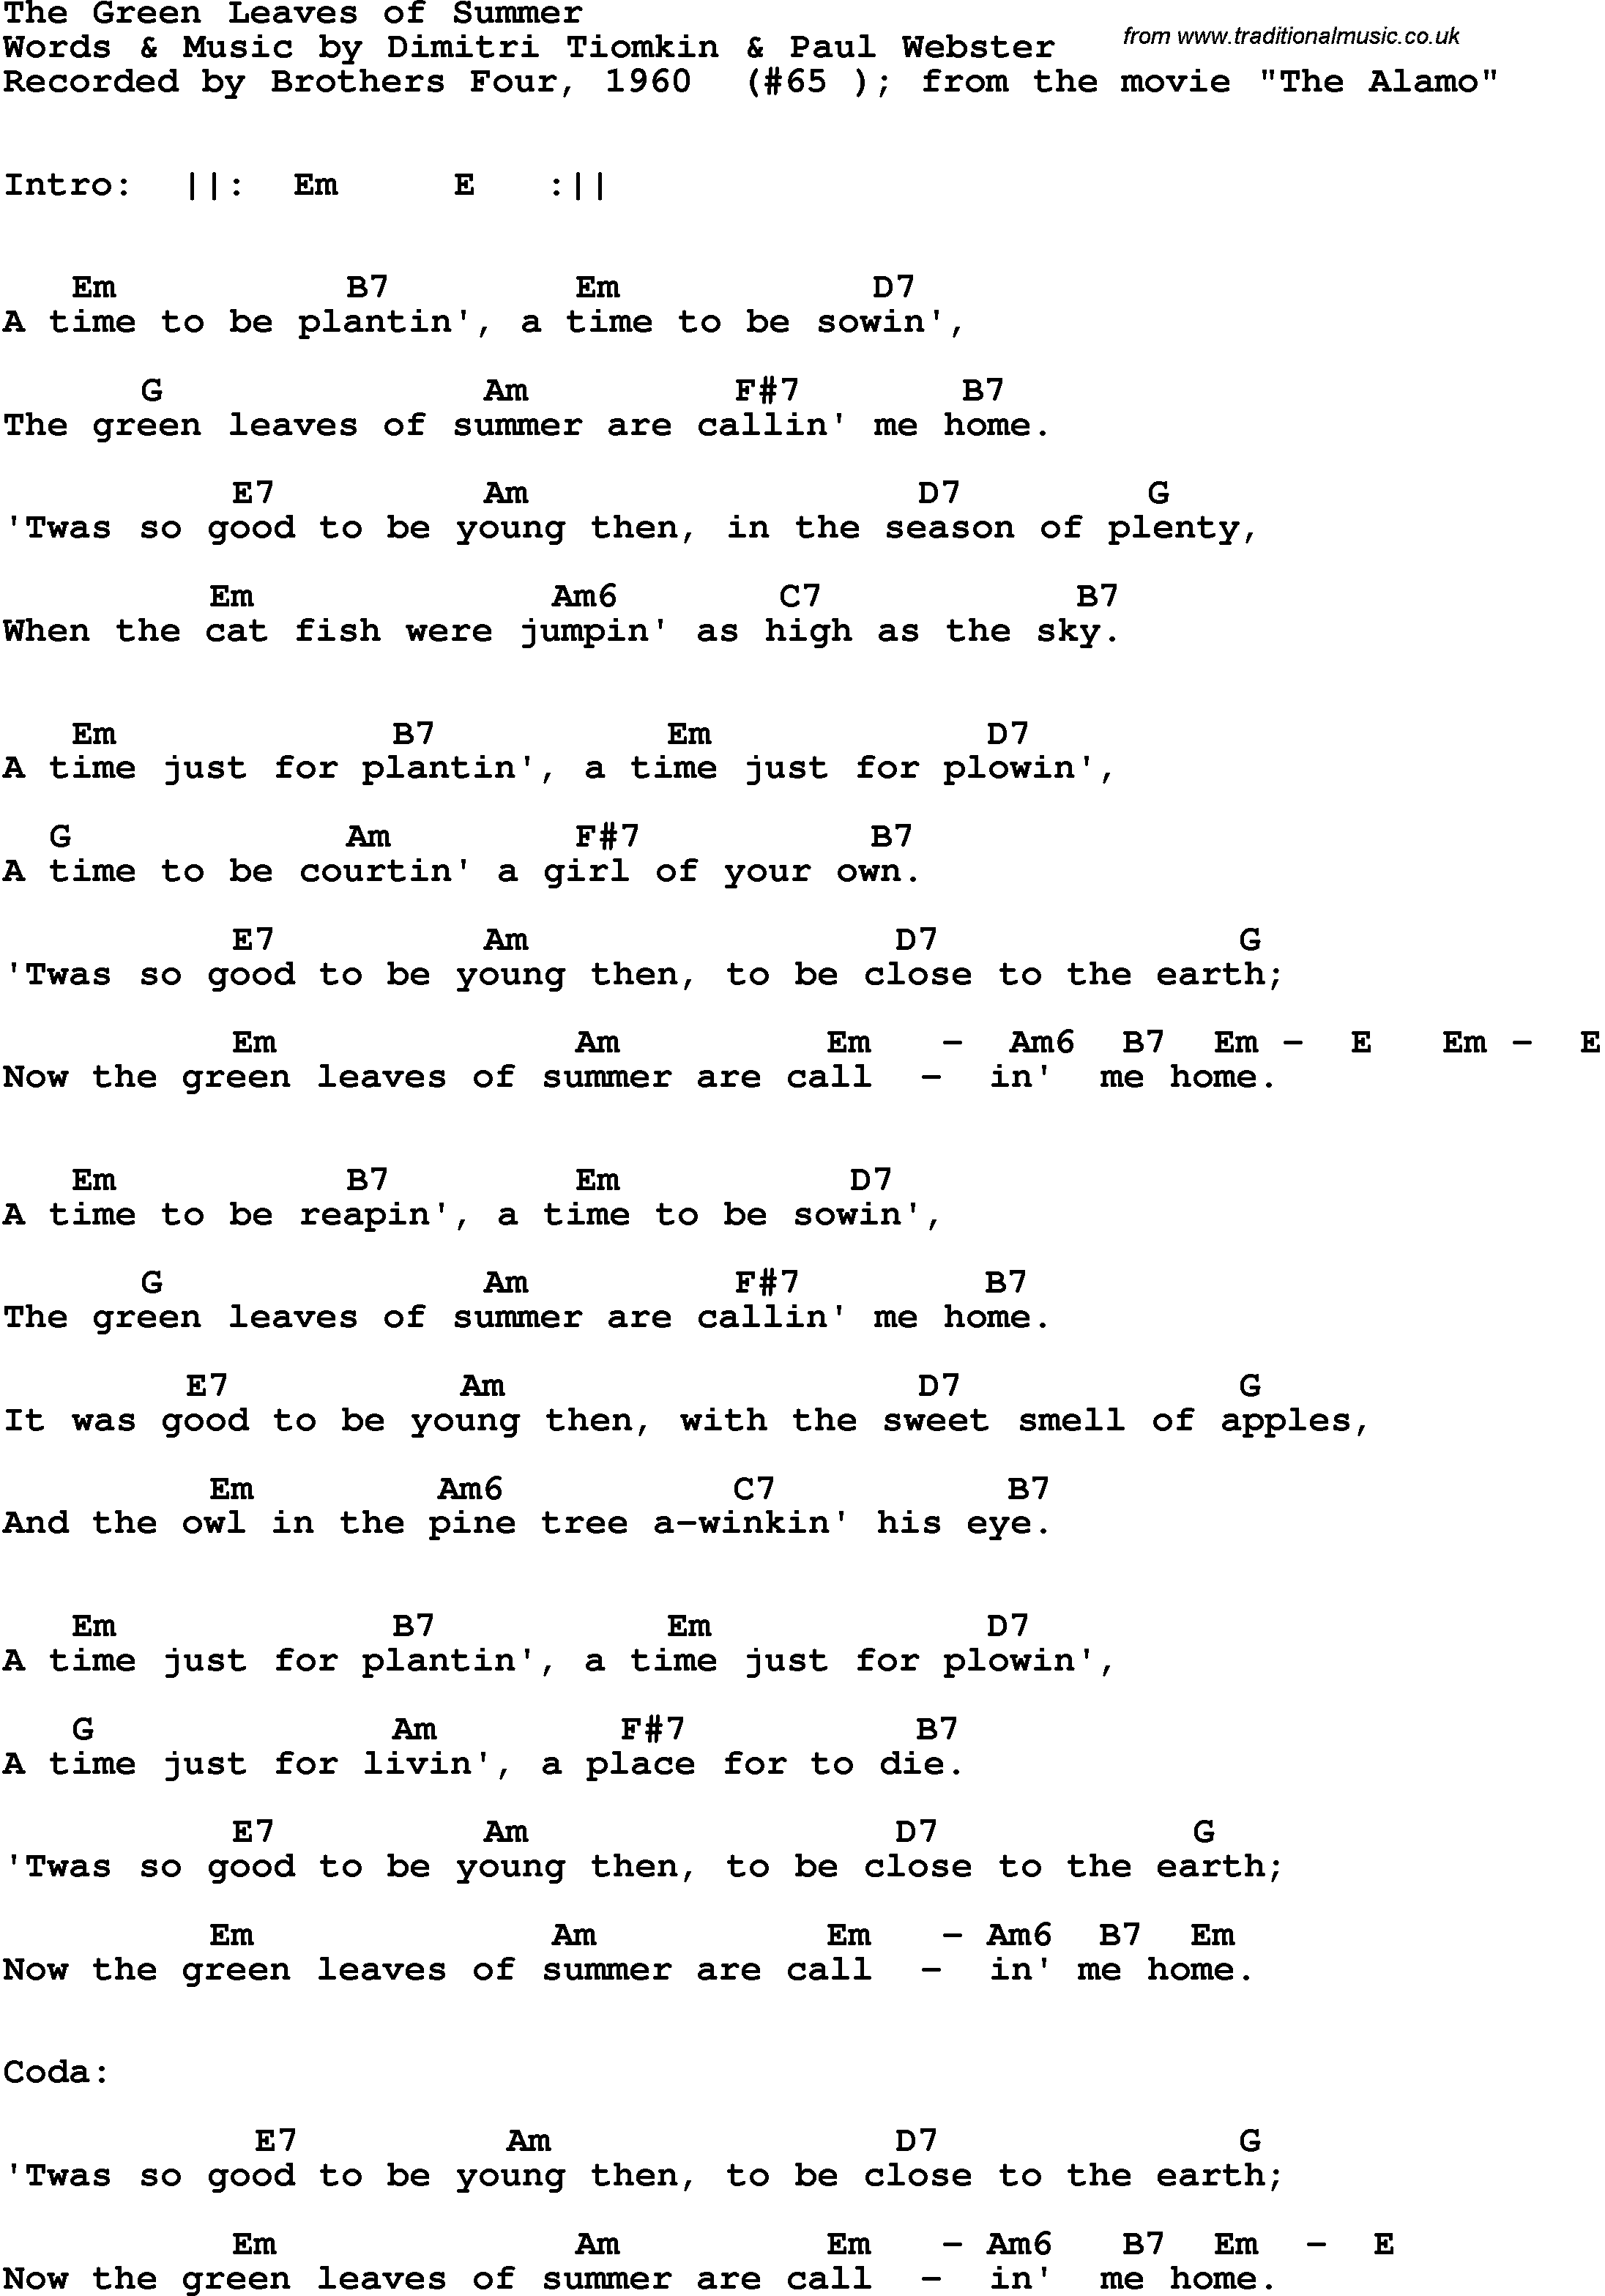 Song Lyrics with guitar chords for Green Leaves Of Summer, The - The Brothers Four, 1960